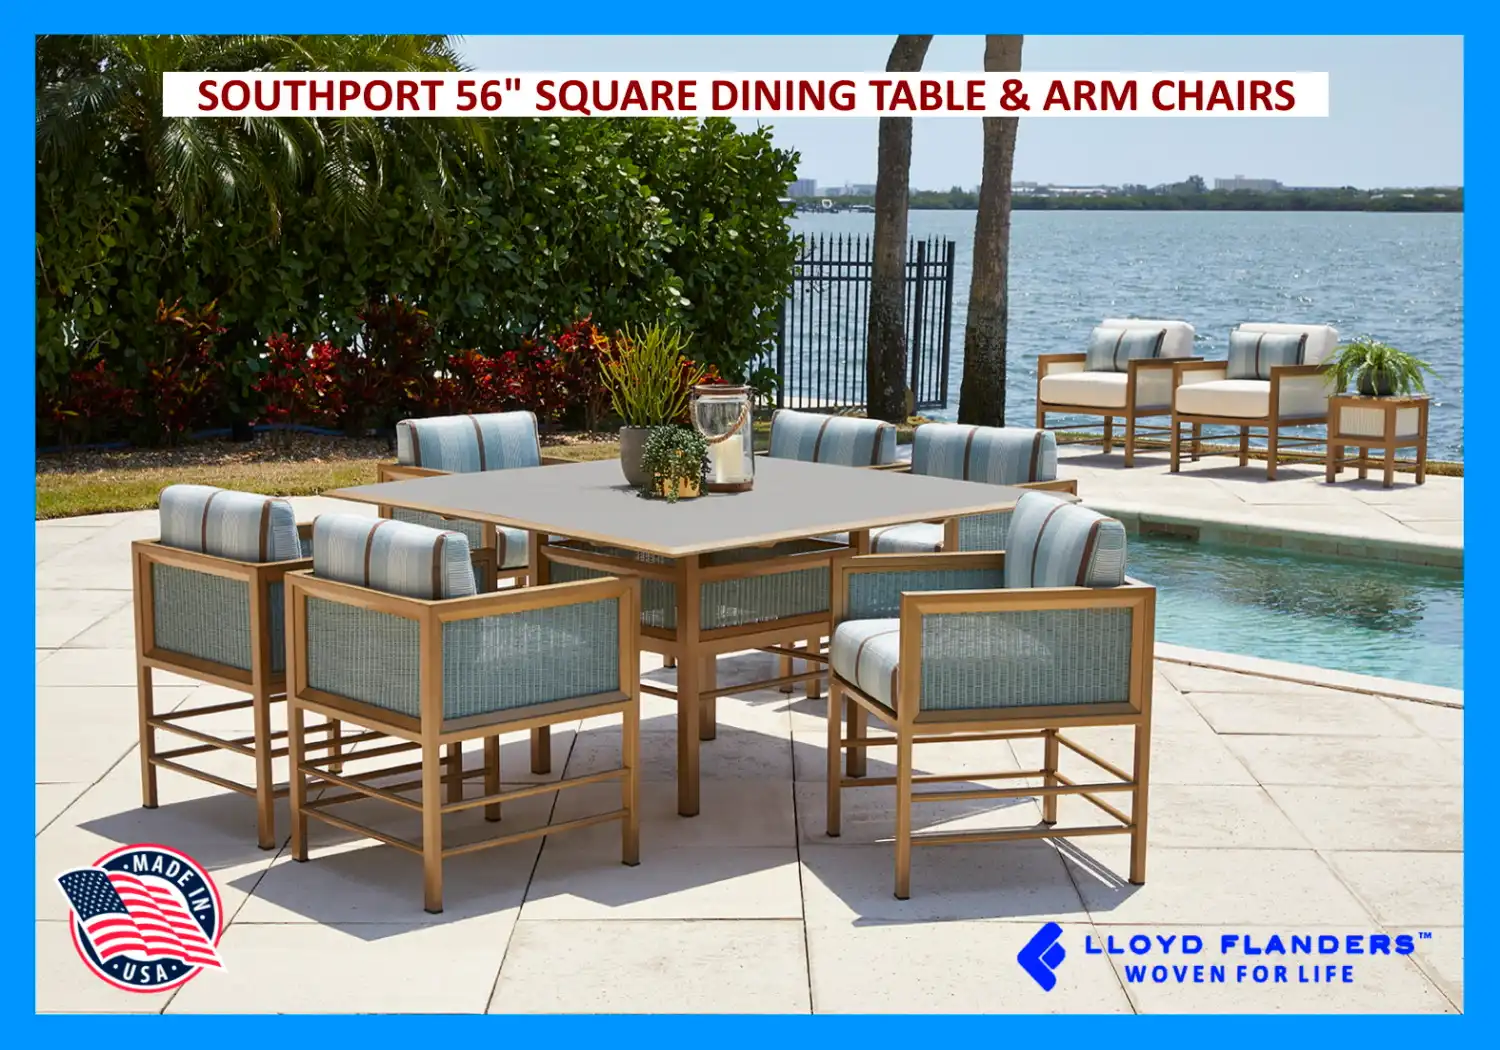 SOUTHPORT 56" SQUARE DINING TABLE & ARM CHAIRS